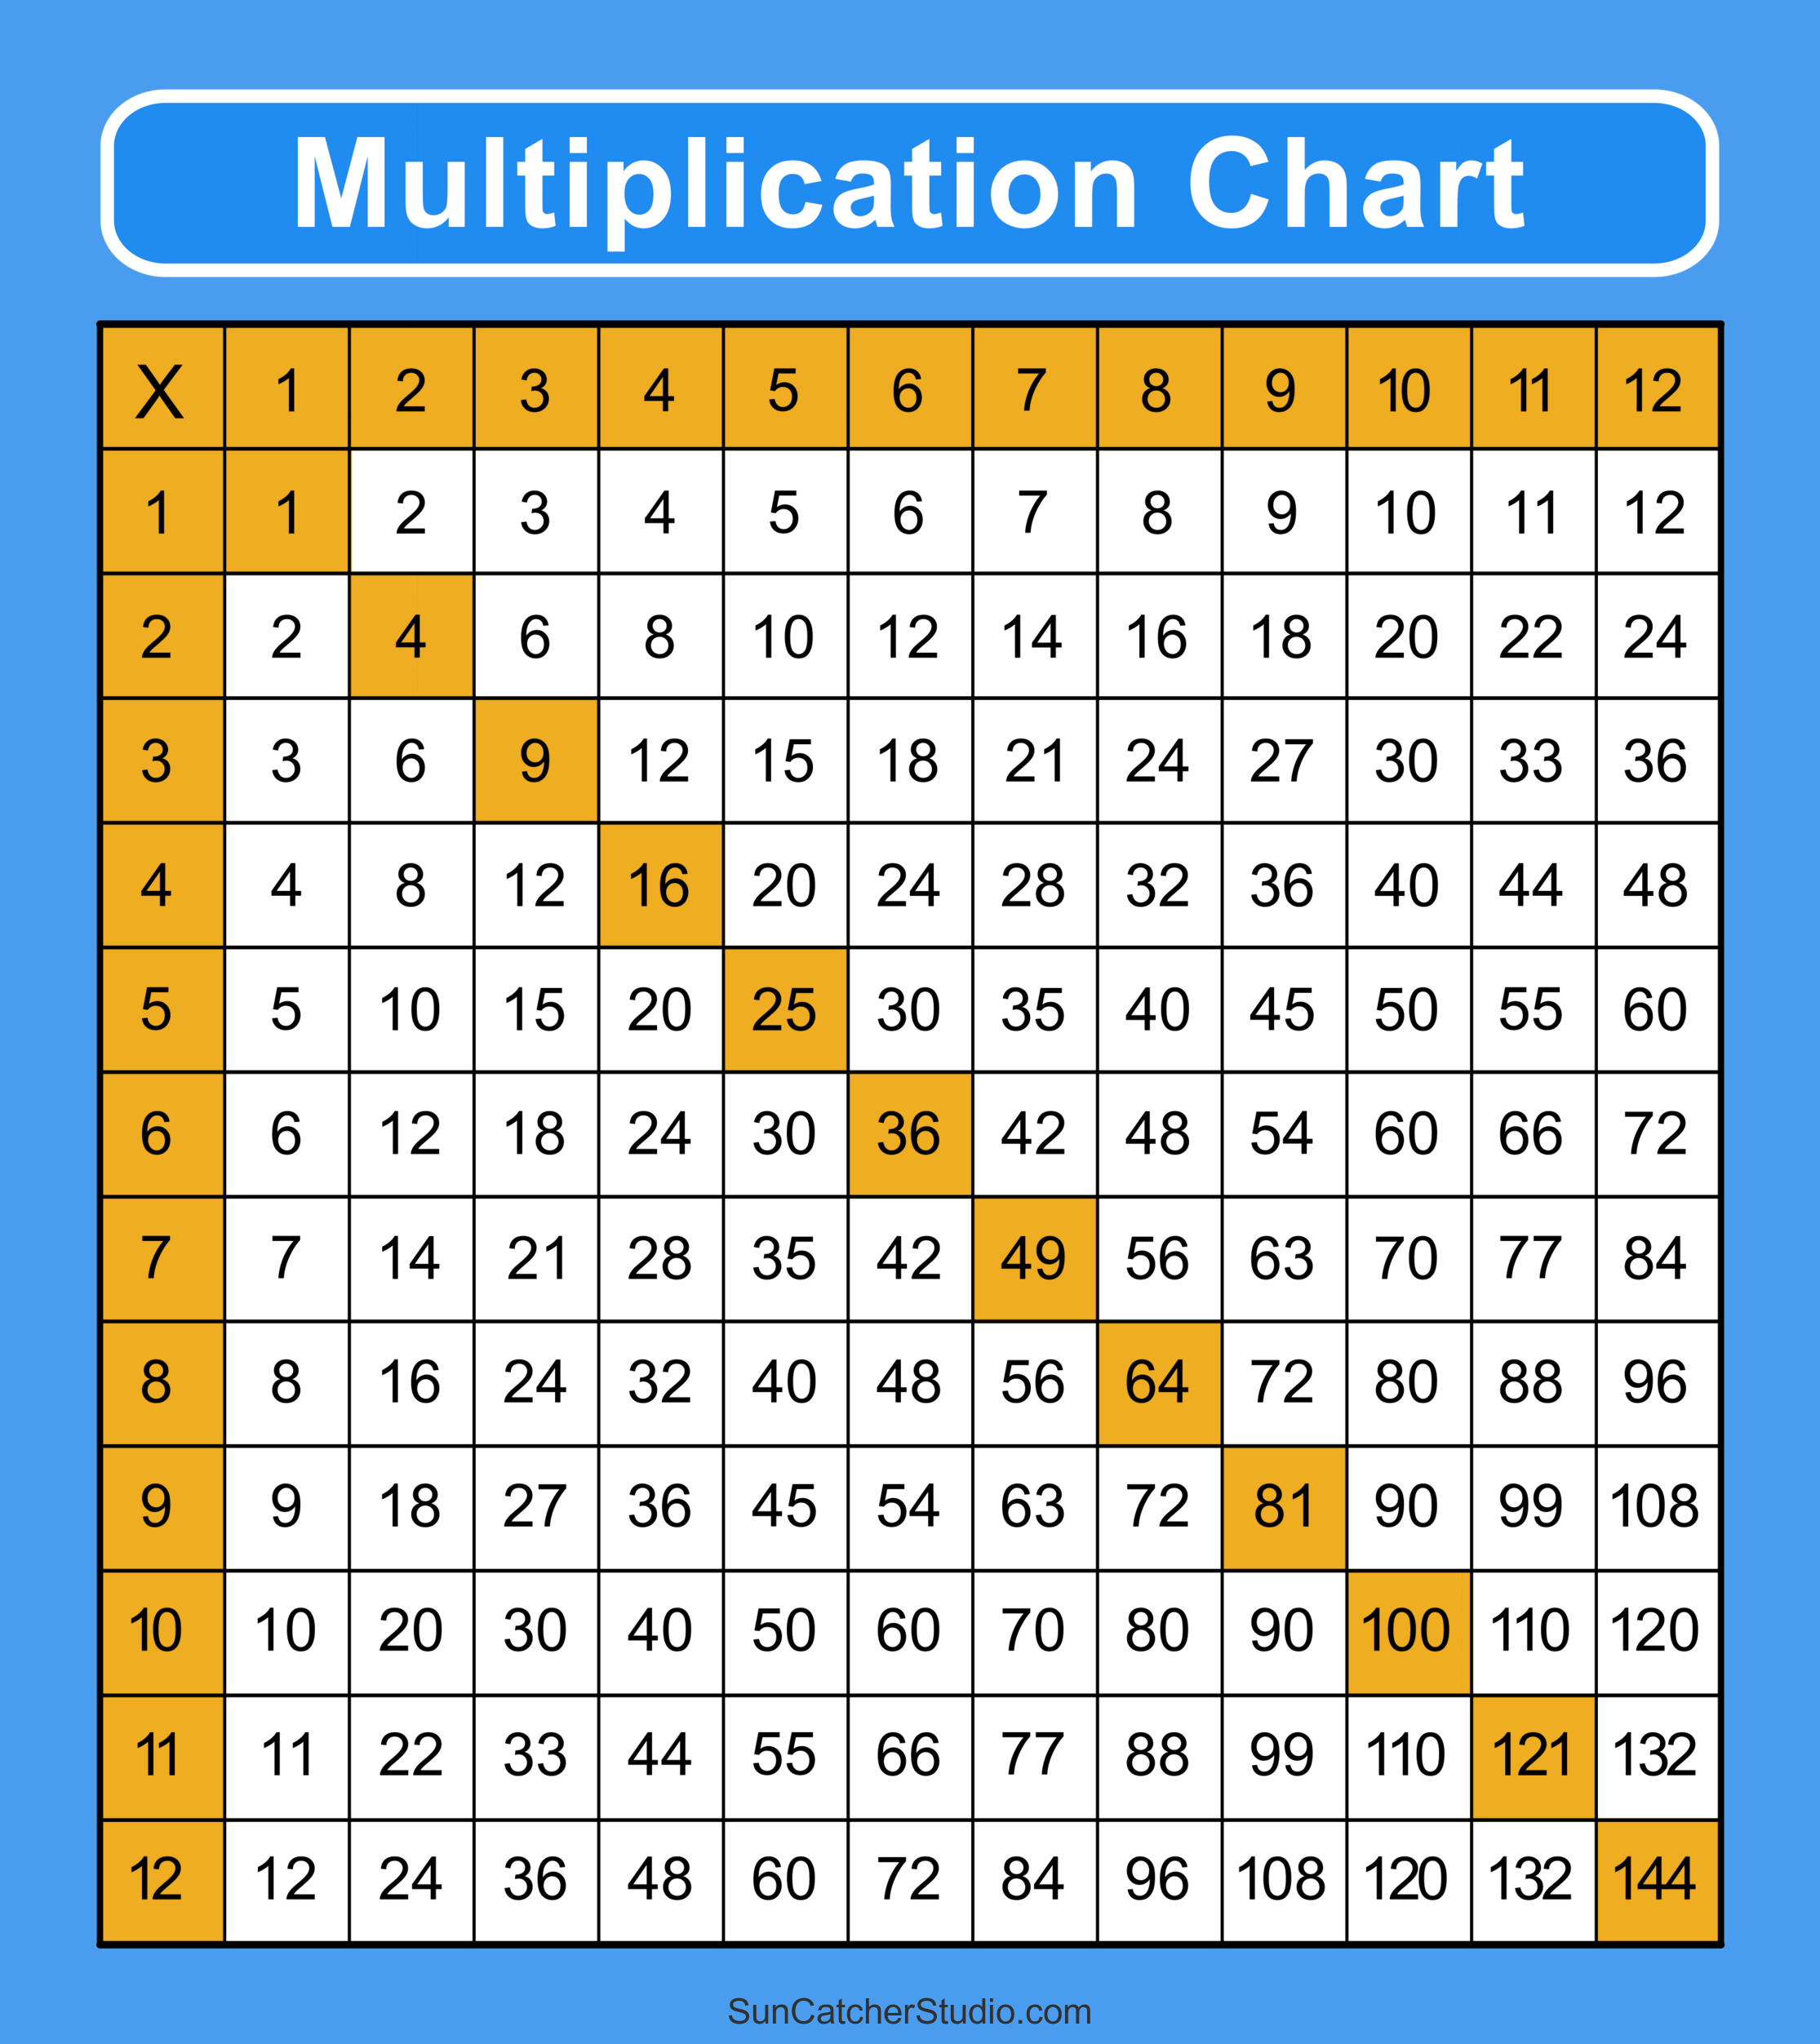 Multiplication Charts PDF Free Printable Times Tables DIY Projects Patterns Monograms Designs Templates